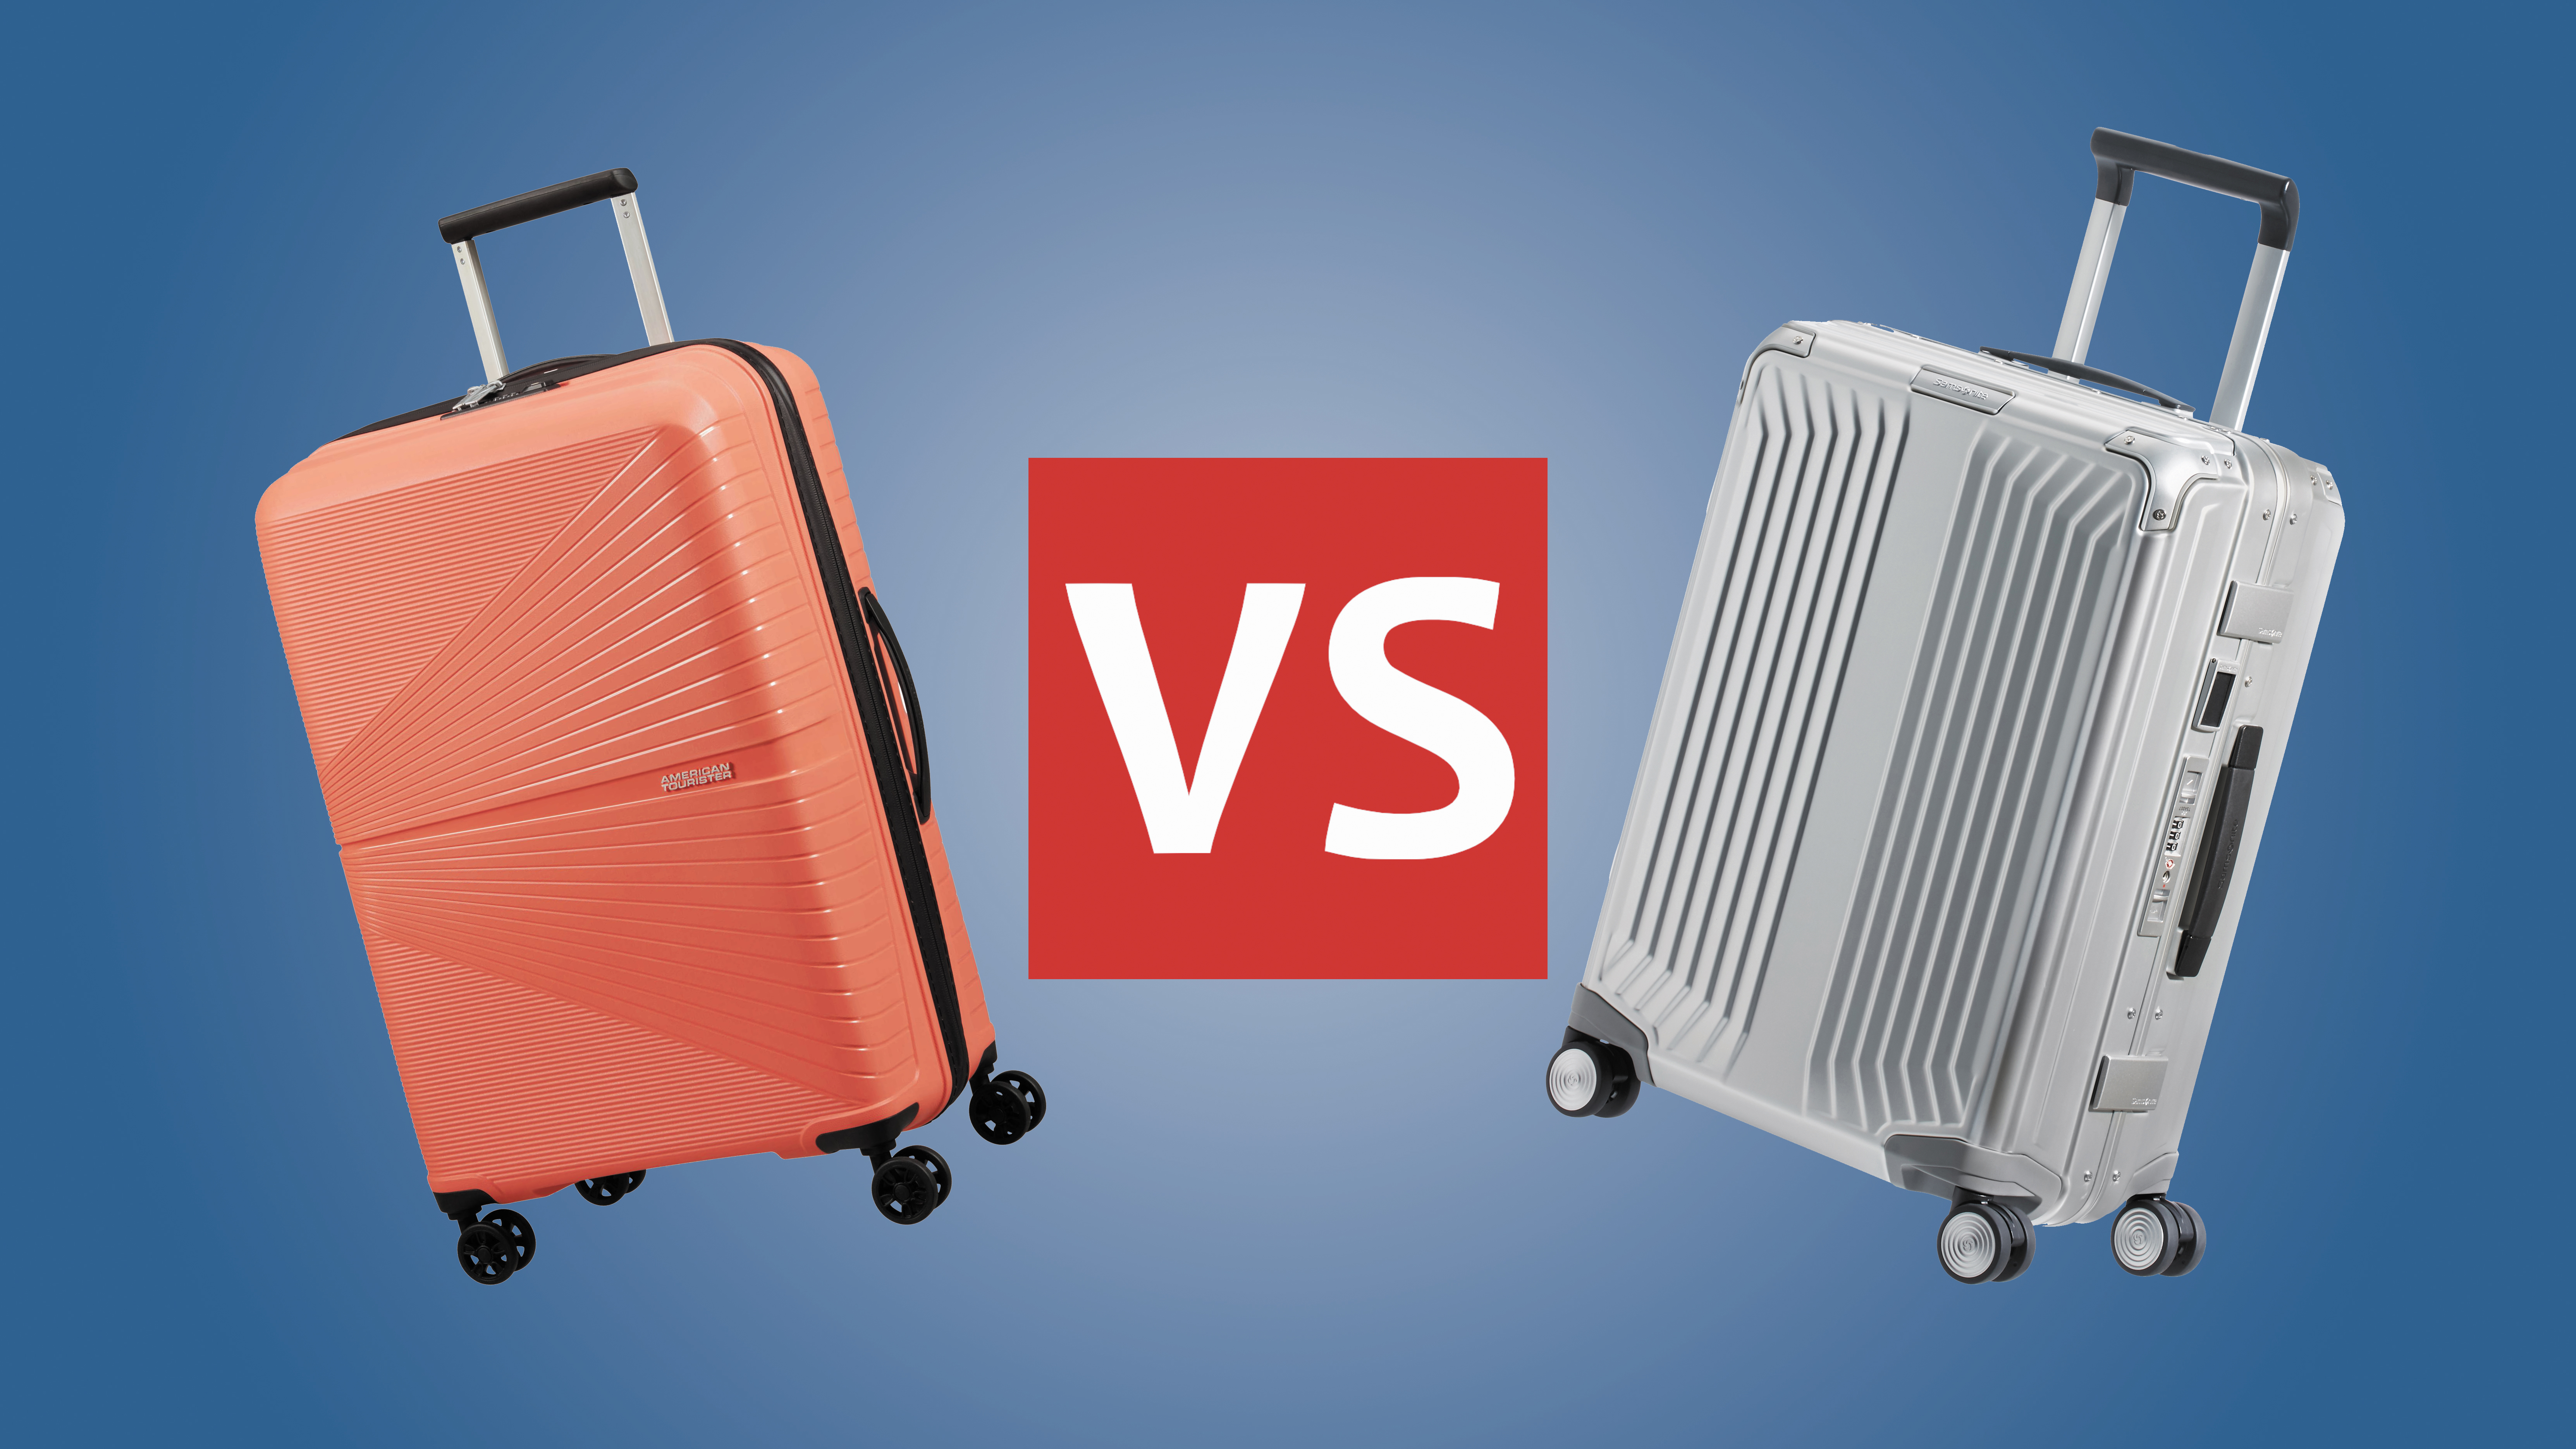 De vreemdeling Bad passend Samsonite vs American Tourister: which brand makes the best luggage? | T3